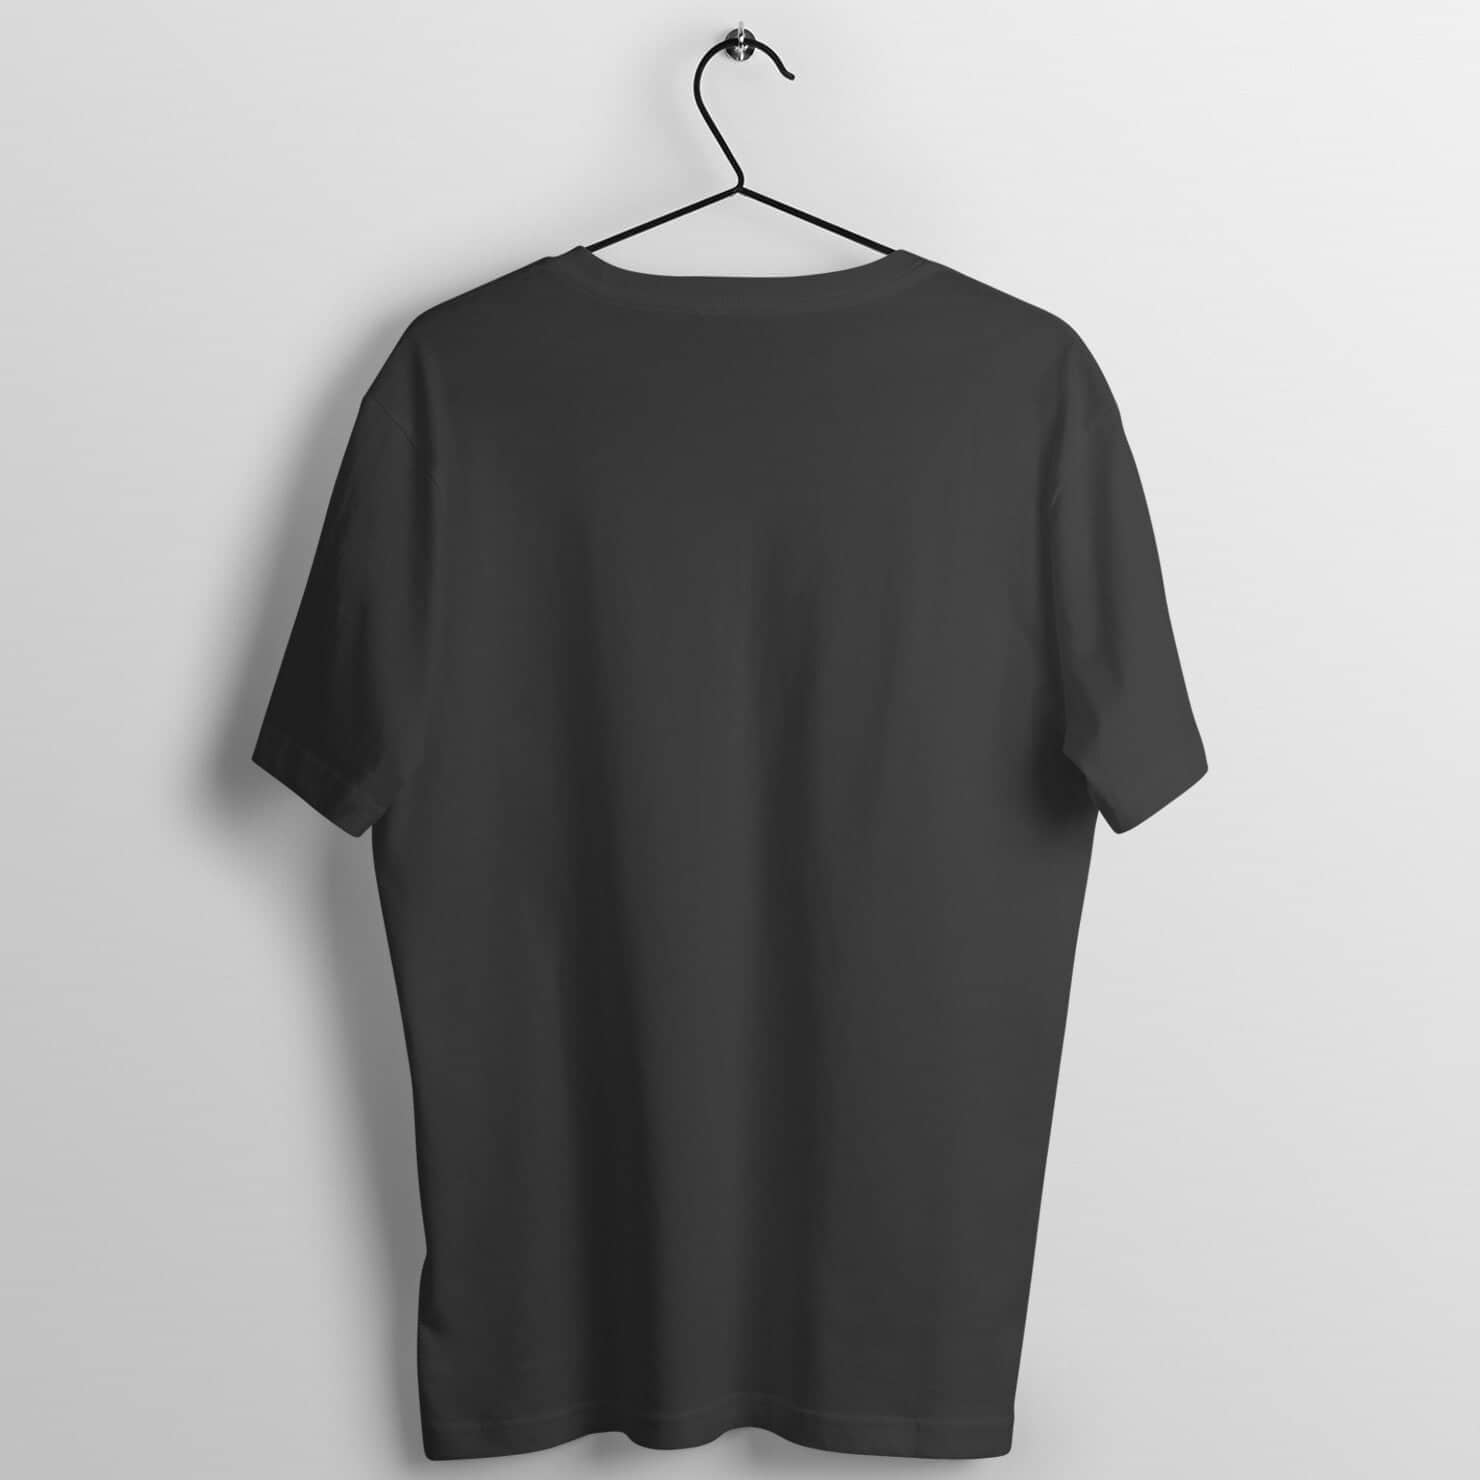 Introverted But Willing to Discuss K-POP Exclusive Black T Shirt for Men and Women Printrove 